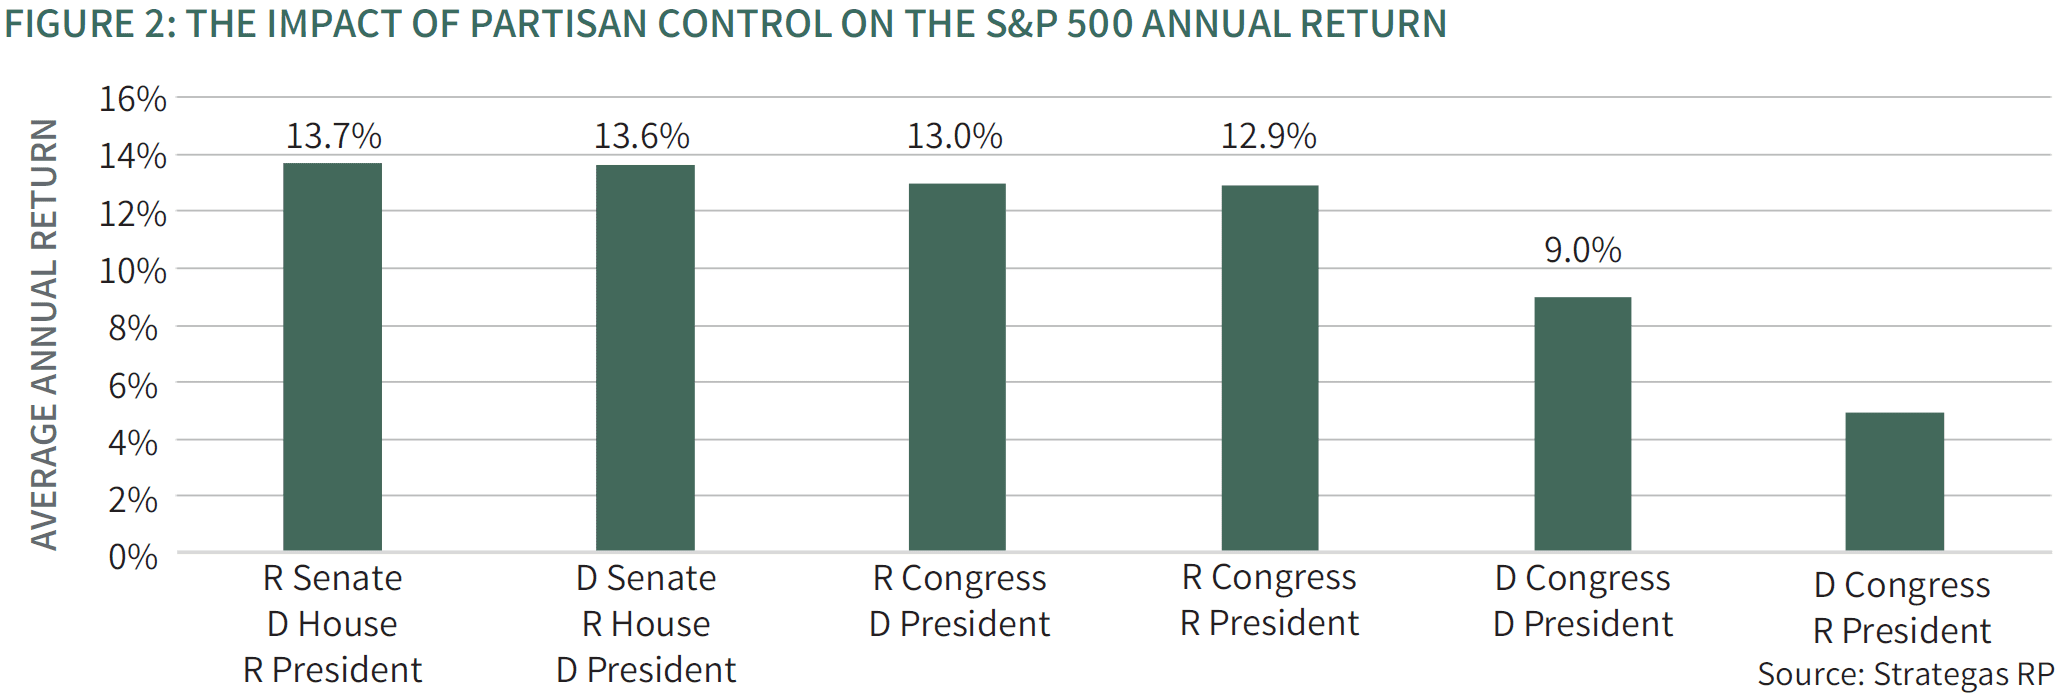 Graph highlighting the impact of partisan control on the S&P 500 annual return